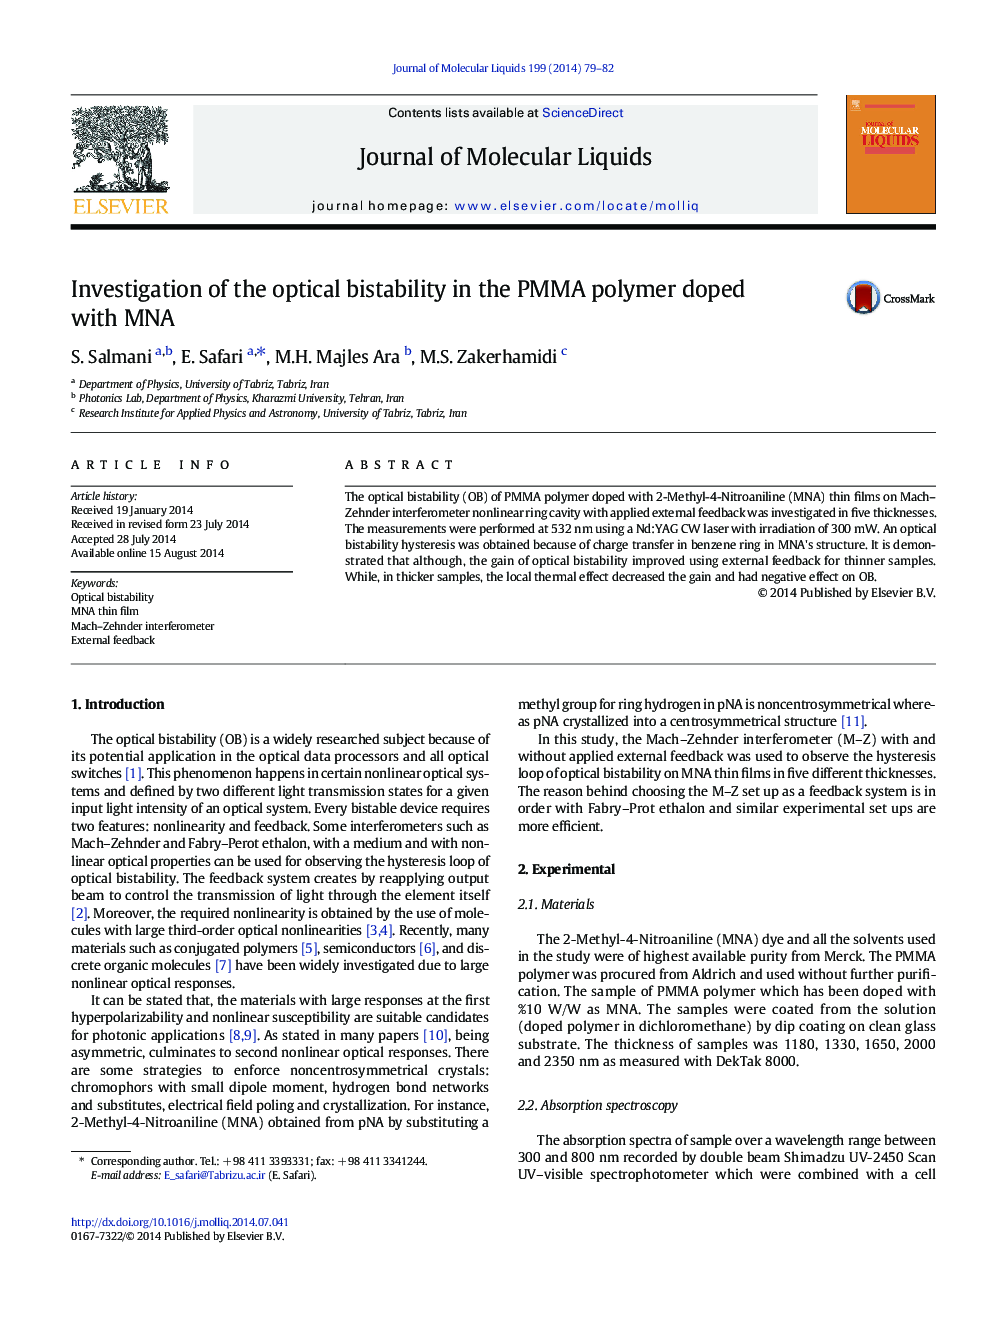 Investigation of the optical bistability in the PMMA polymer doped with MNA